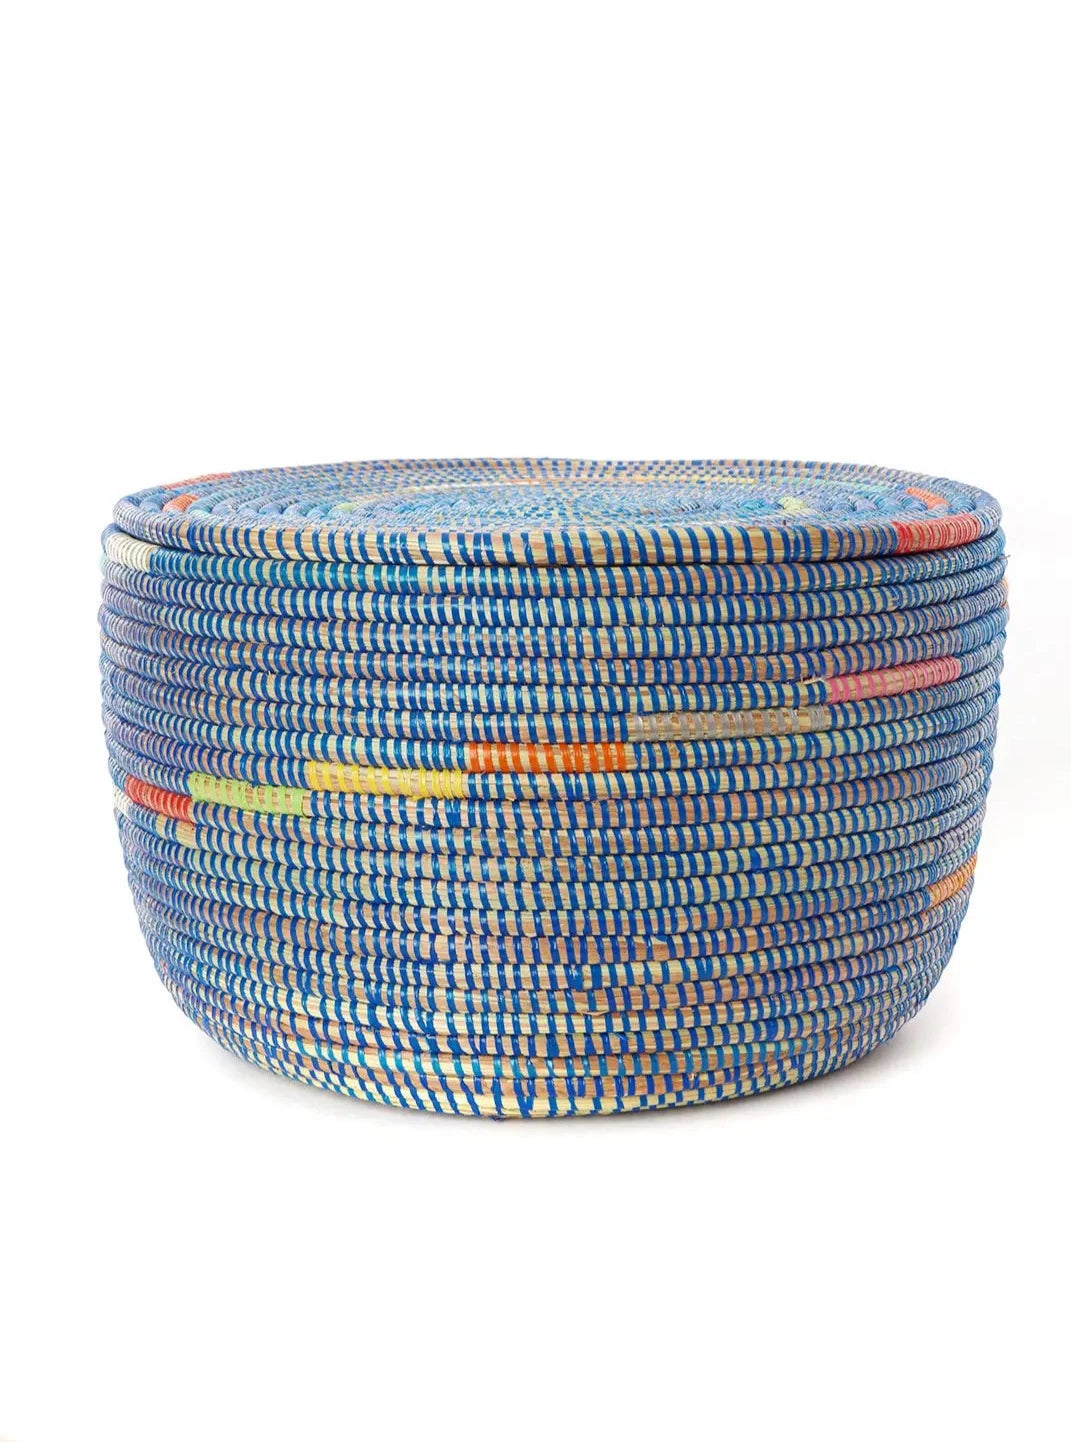 Blue Flat Top Storage Basket with Colorful Spiral